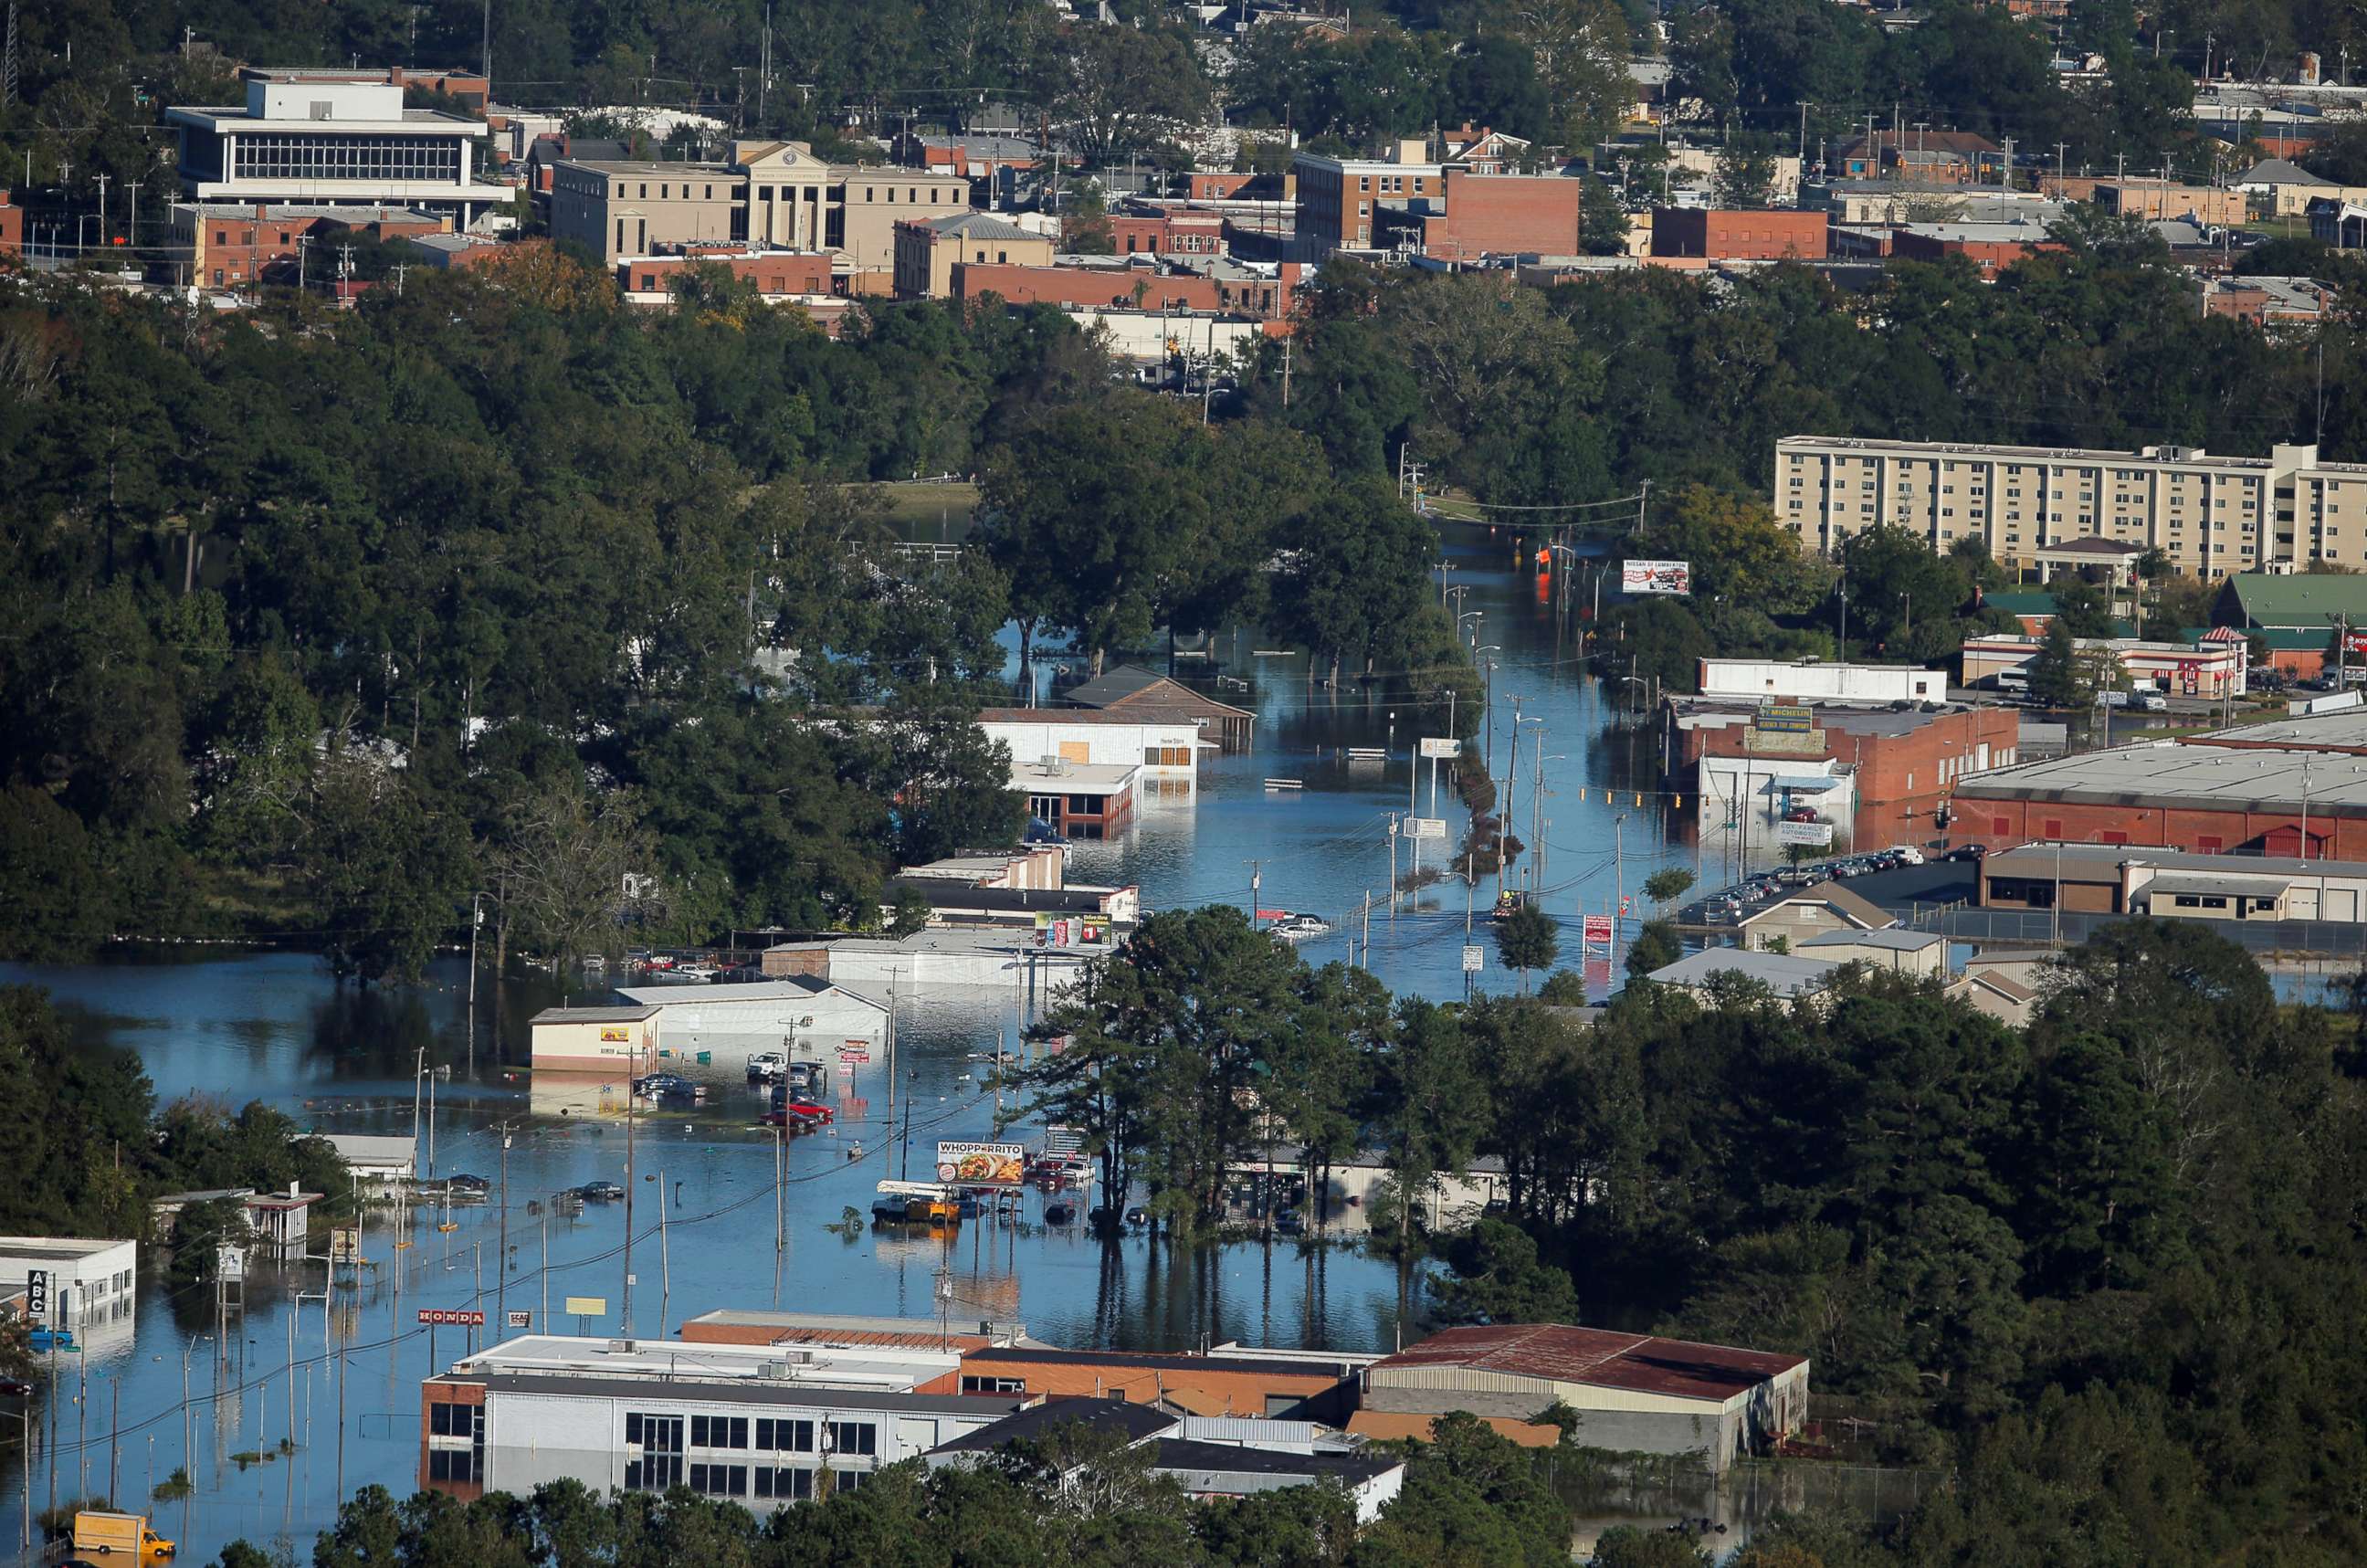 PHOTO: An aerial view shows flood waters after Hurricane Matthew in Lumberton, N.C., Oct. 10, 2016.